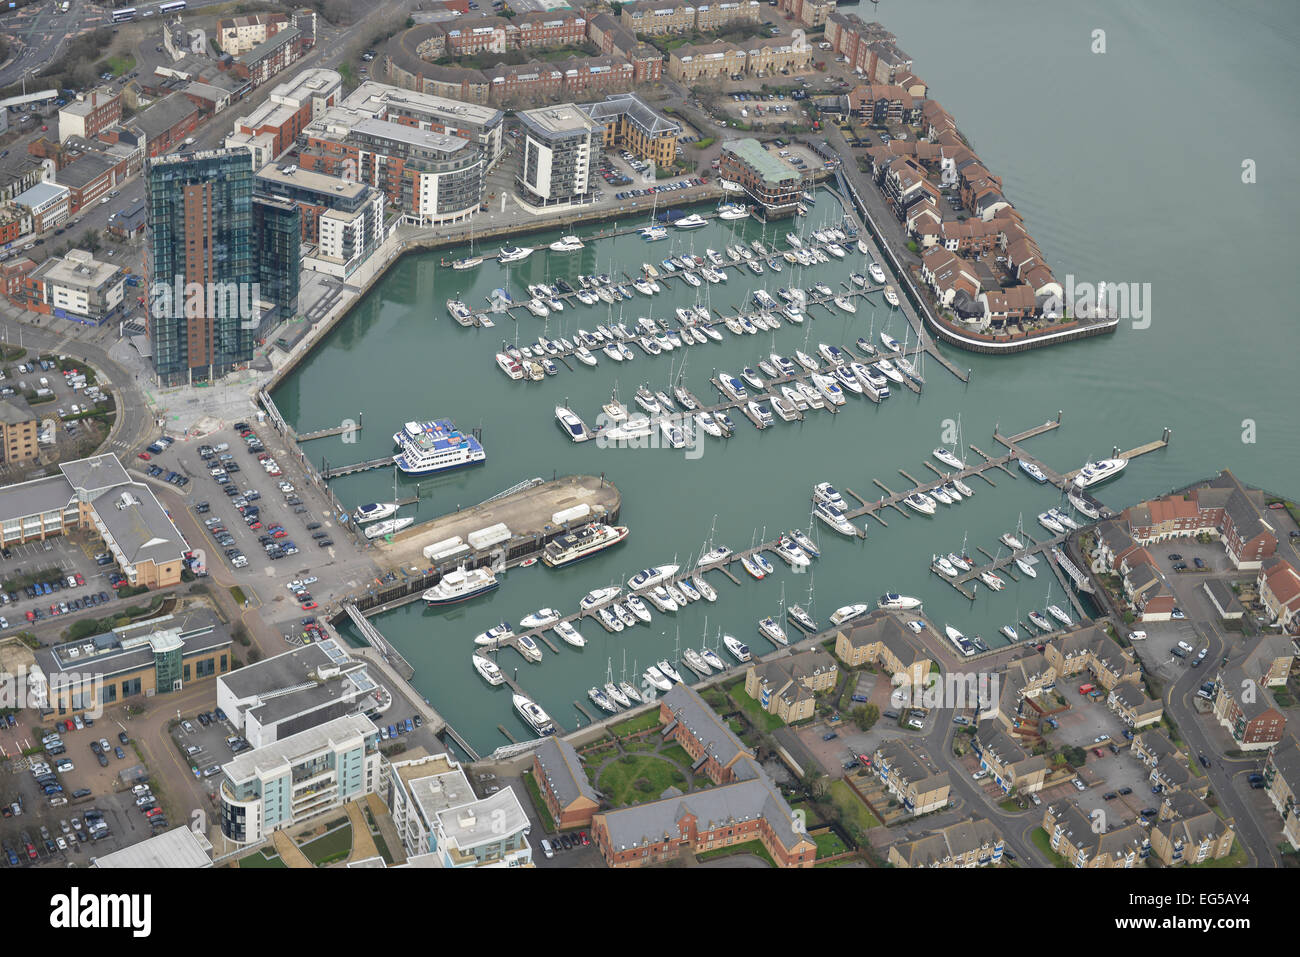 An aerial view of the Ocean Village Marina in Southampton Stock Photo